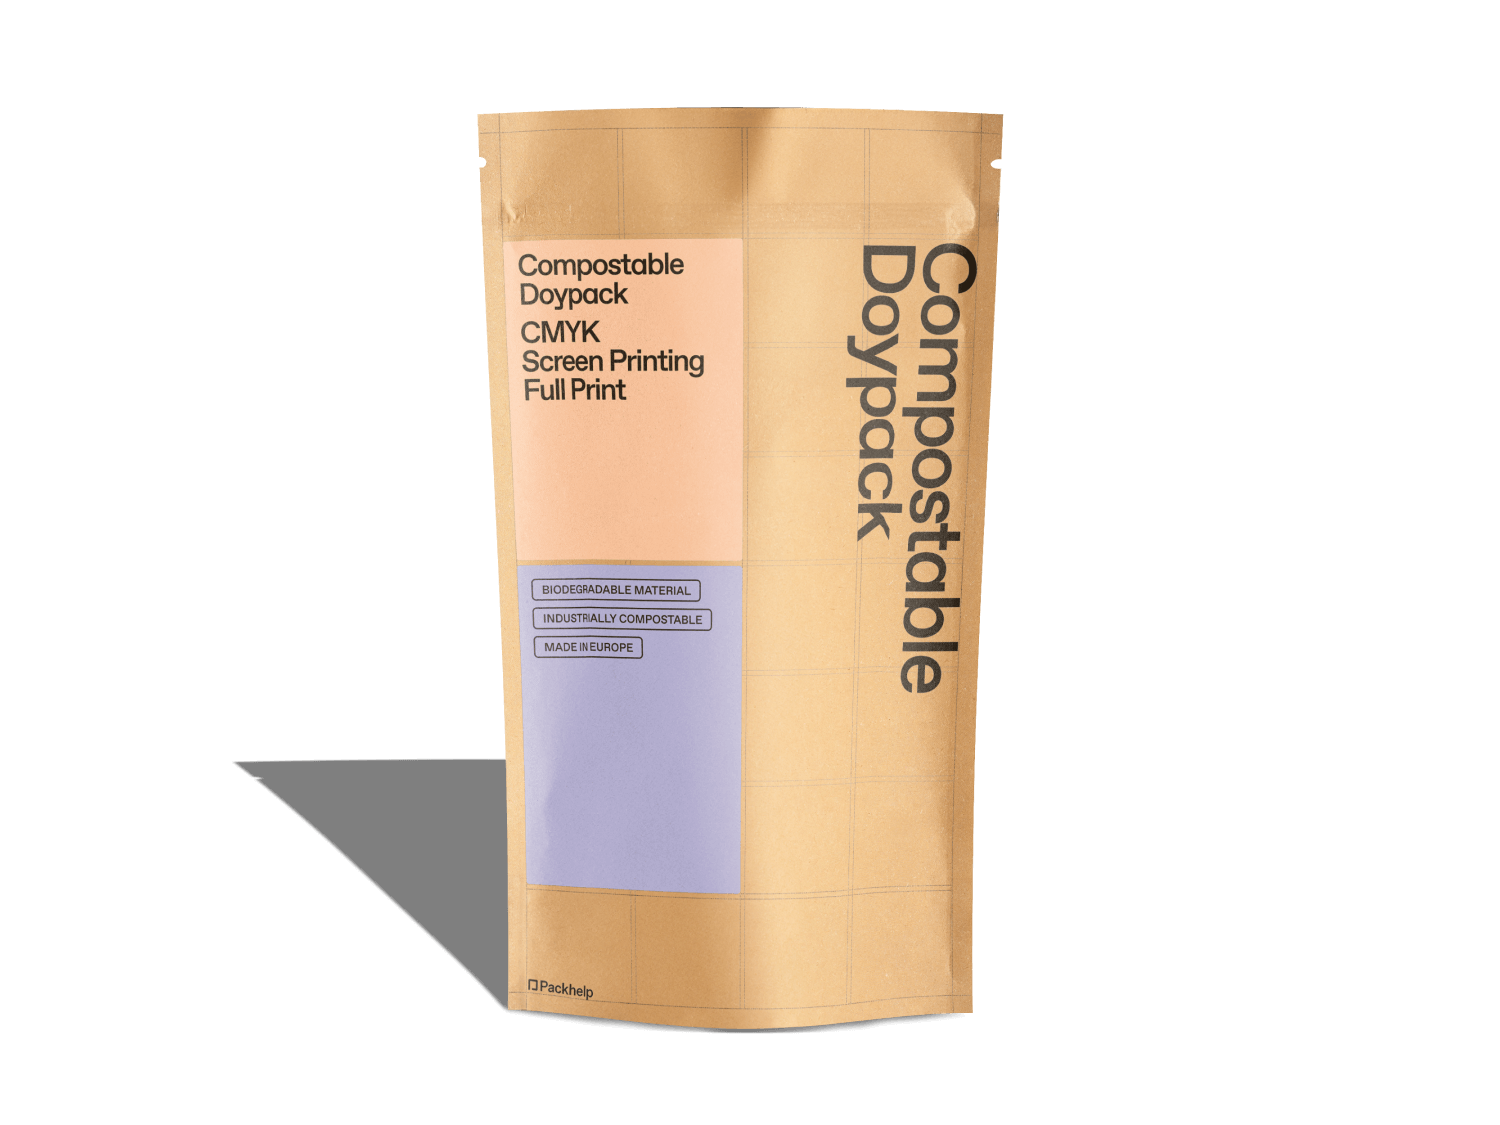 compostable doypack with print